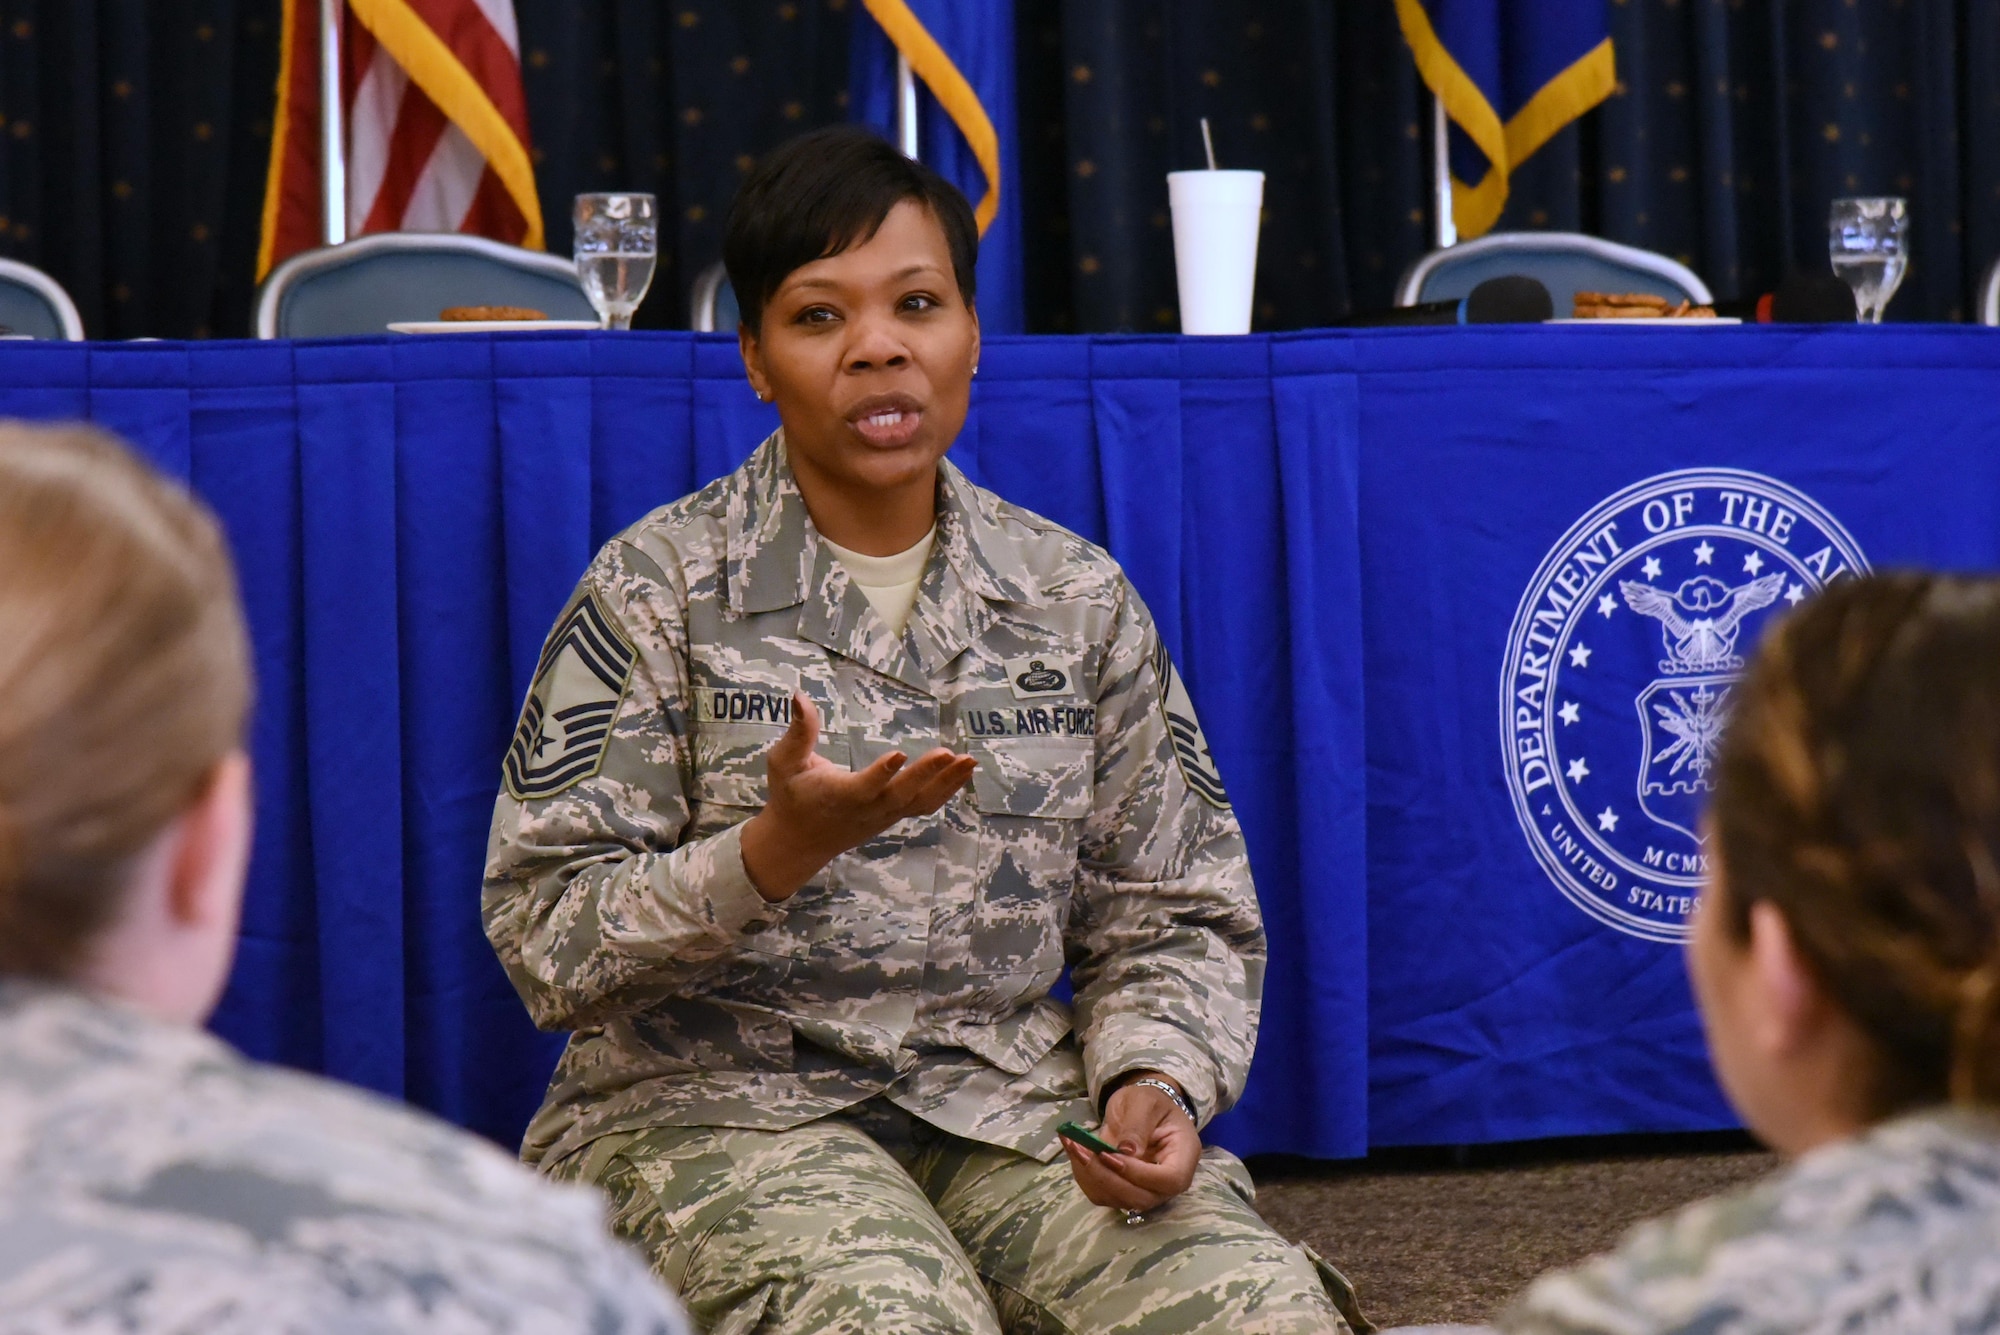 Chief Master Sgt. Janna Dorvil, Air Force Enlisted Diversity chief, answers a question at the second 20th Air Force Women’s Leadership Symposium at Kirtland Air Force Base, N.M., Sept. 28, 2016. Senior leaders mentored both male and female junior Airmen and stressed the importance of increasing diversity within the Air Force. The three-day event supports 20th AF’s goal to coach, train and mentor nuclear professionals and leaders, while developing a nuclear command environment that fosters understanding, respect and the support necessary for people to thrive. (U.S. Air Force photo by Ken Moore)